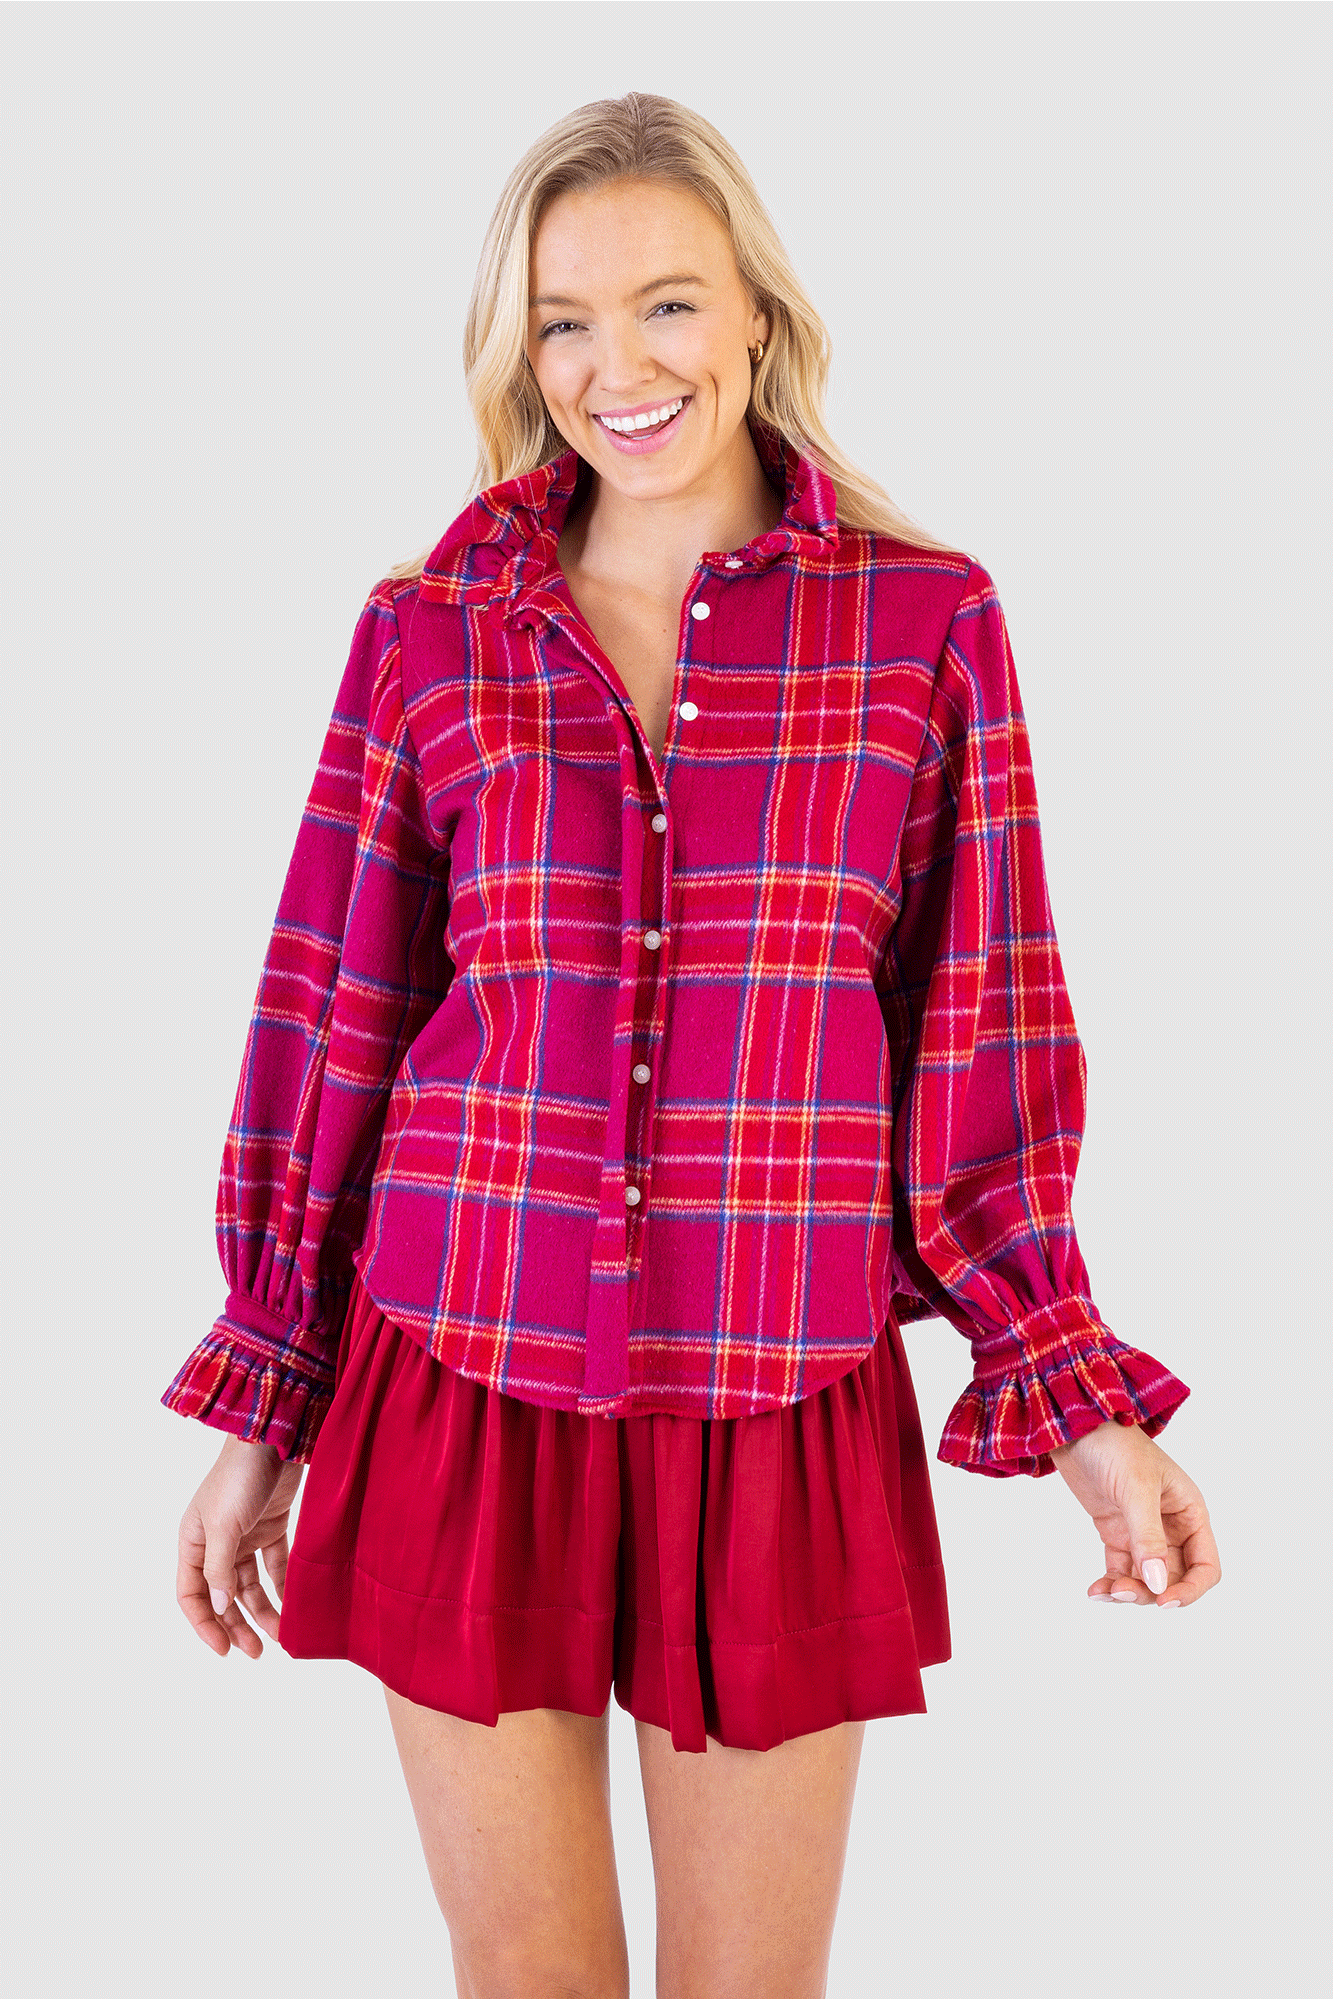 The Phoebe Top from Koch is crafted from lightweight flannel in a timeless Cranberry Plaid. This piece offers superior comfort in a stylish silhouette, making it perfect for any occasion. Accented with a ruffled sleeves for an elegant look, this top is sure to make a statement.